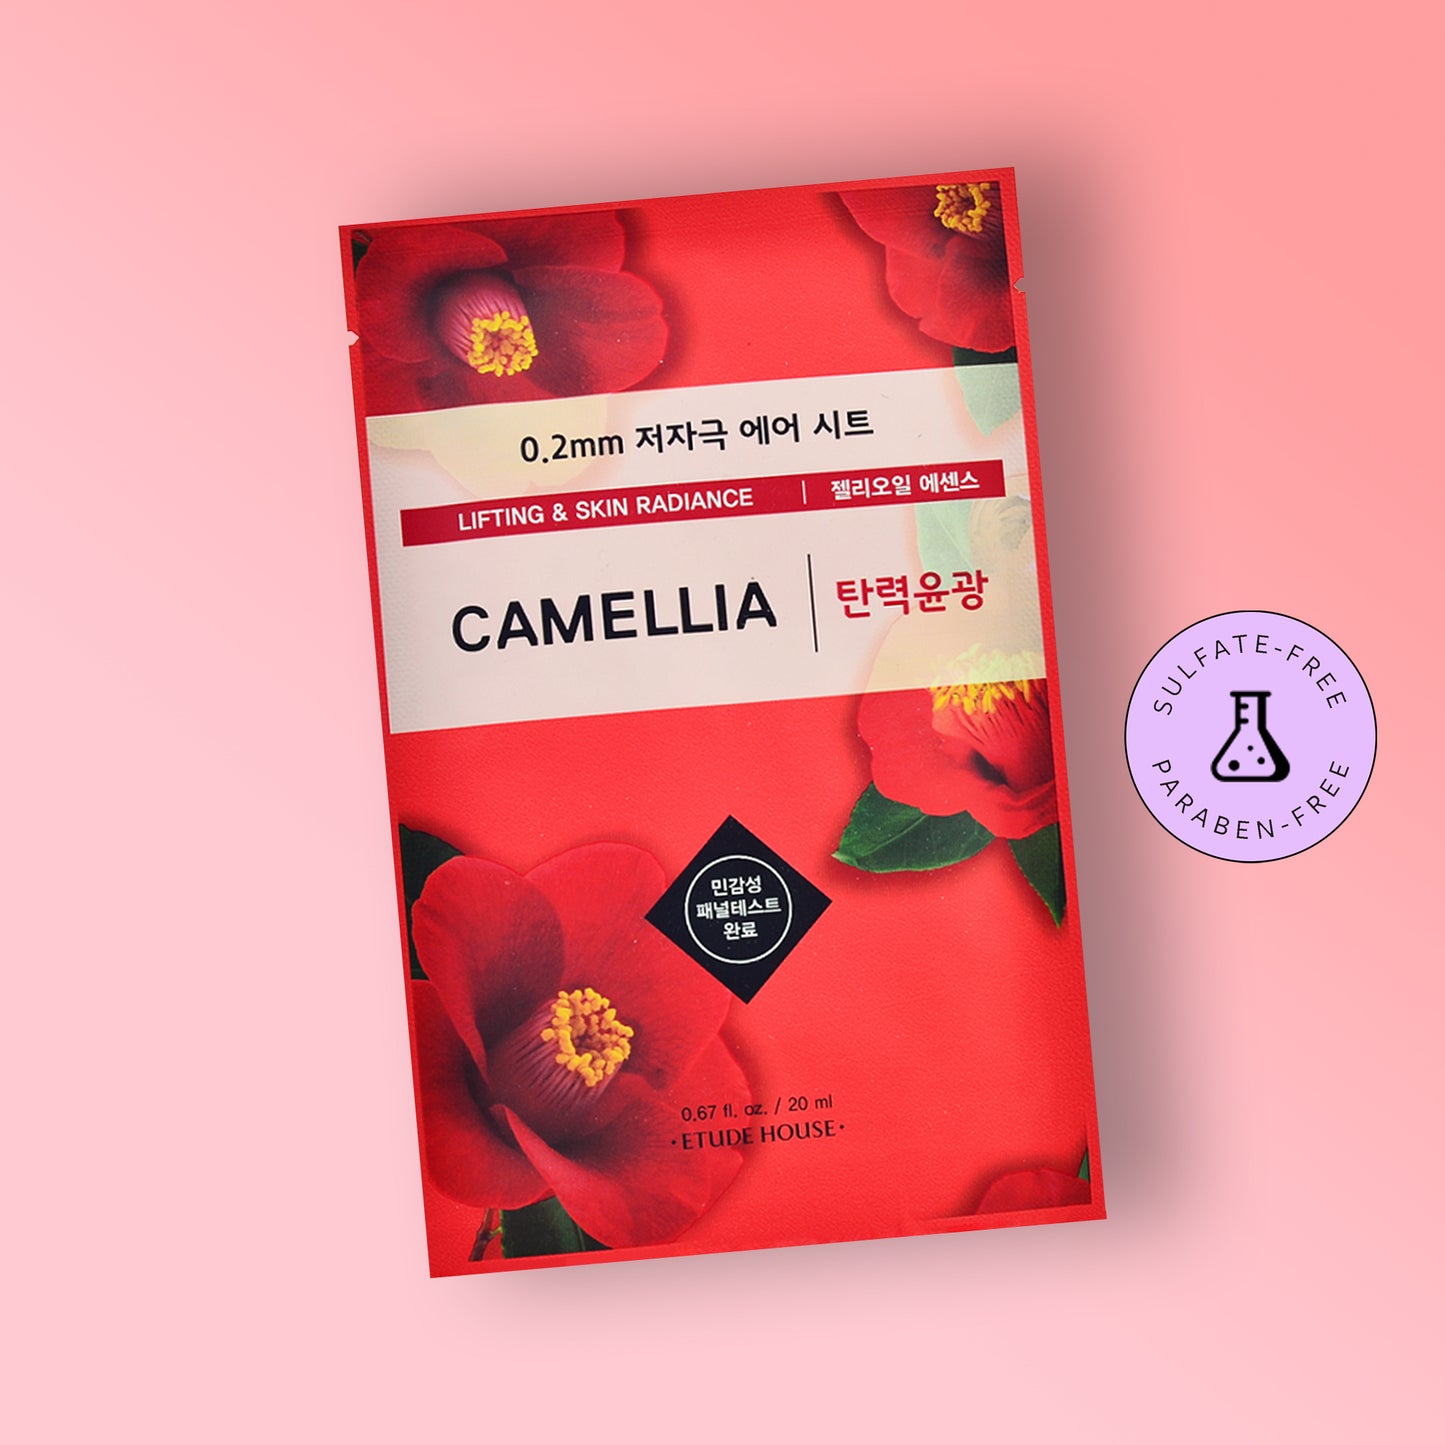 0.2 THERAPY AIR MASK - CAMELLIA